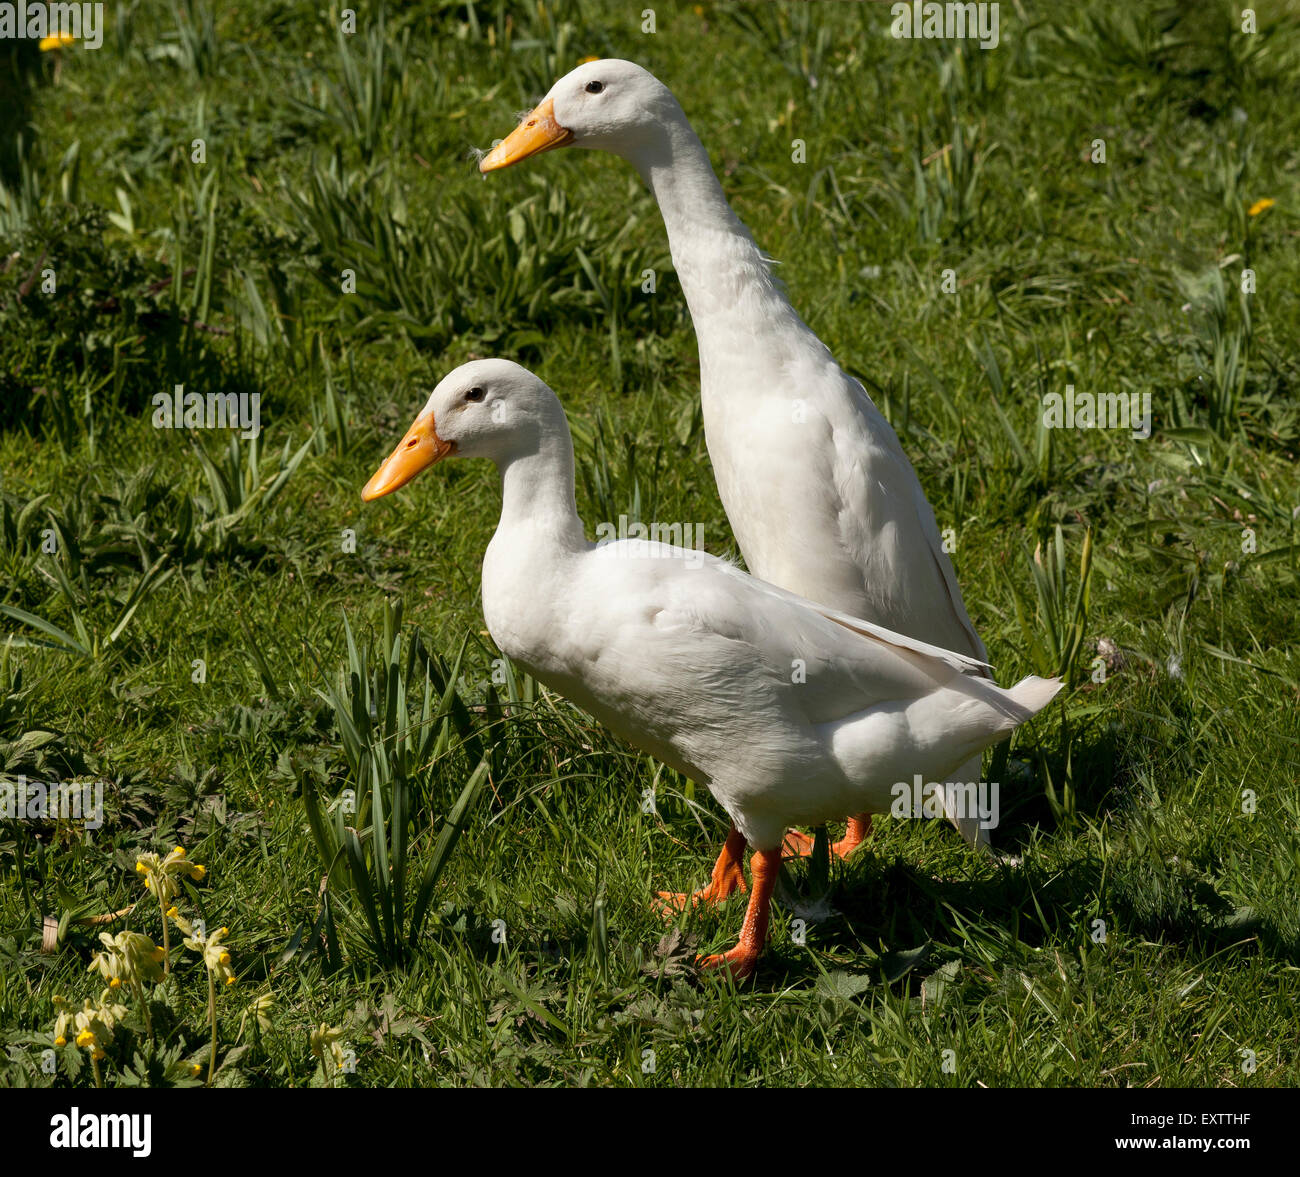 Two white Indian Runner ducks standing on grass with spring Cowslips Stock Photo